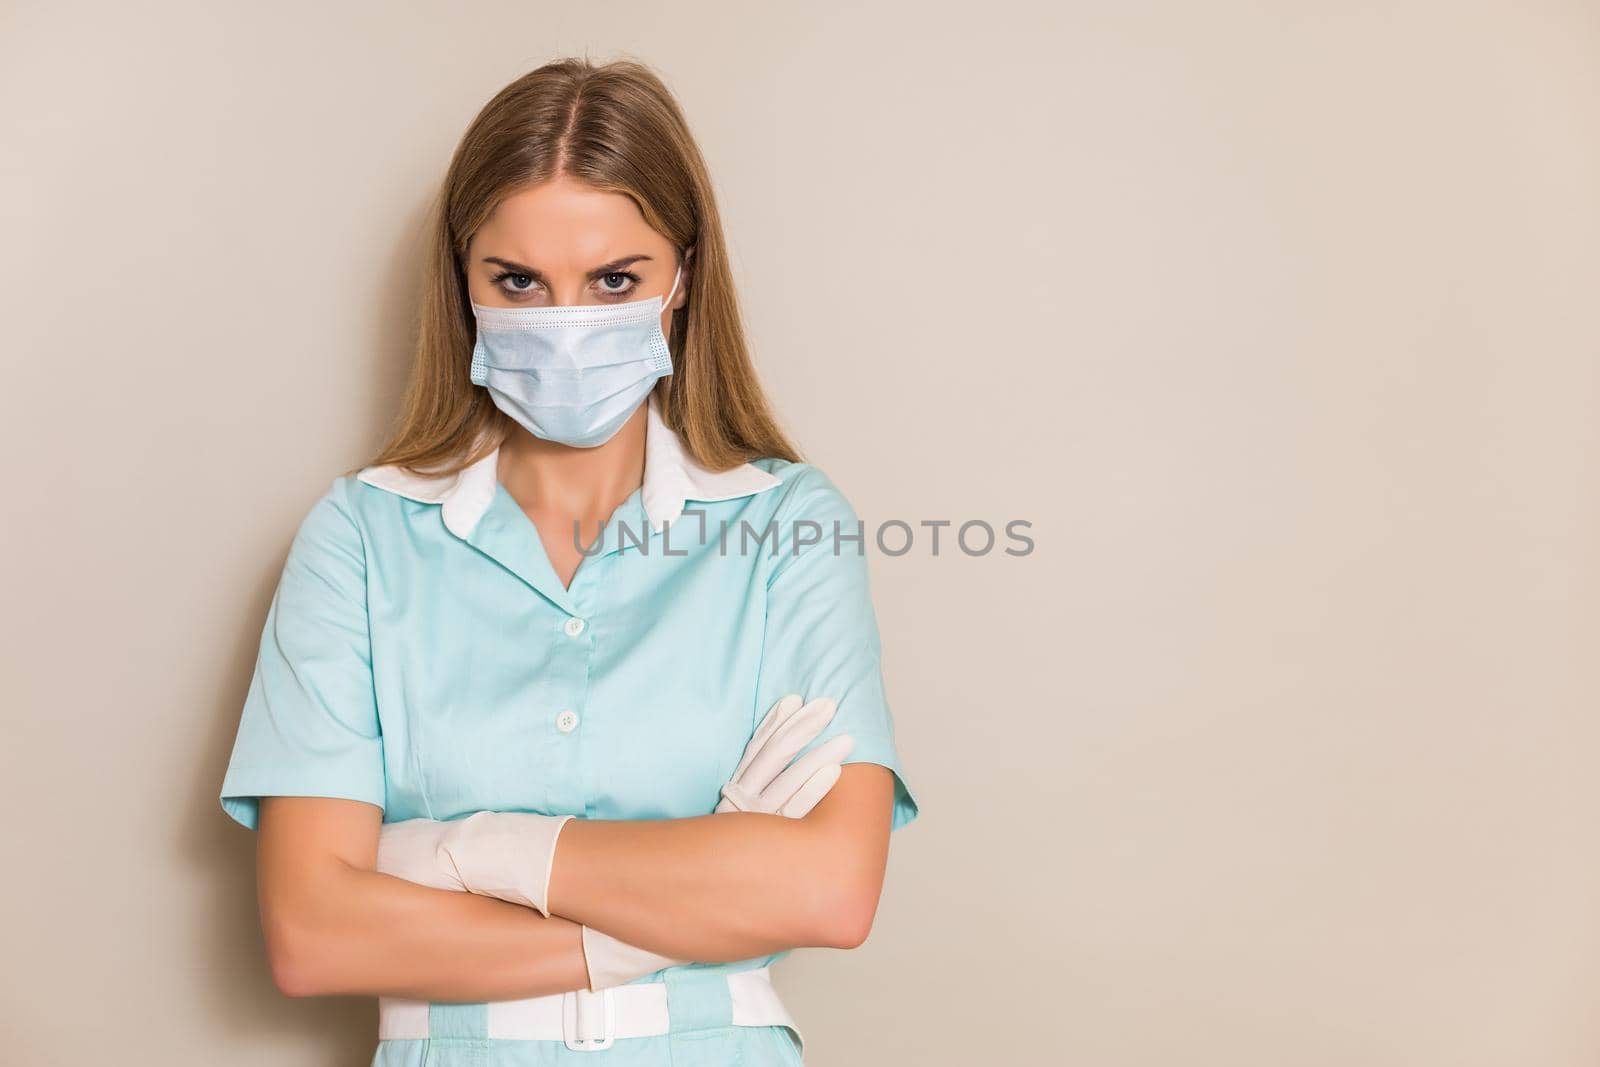 Portrait of angry nurse with protective mask and gloves.